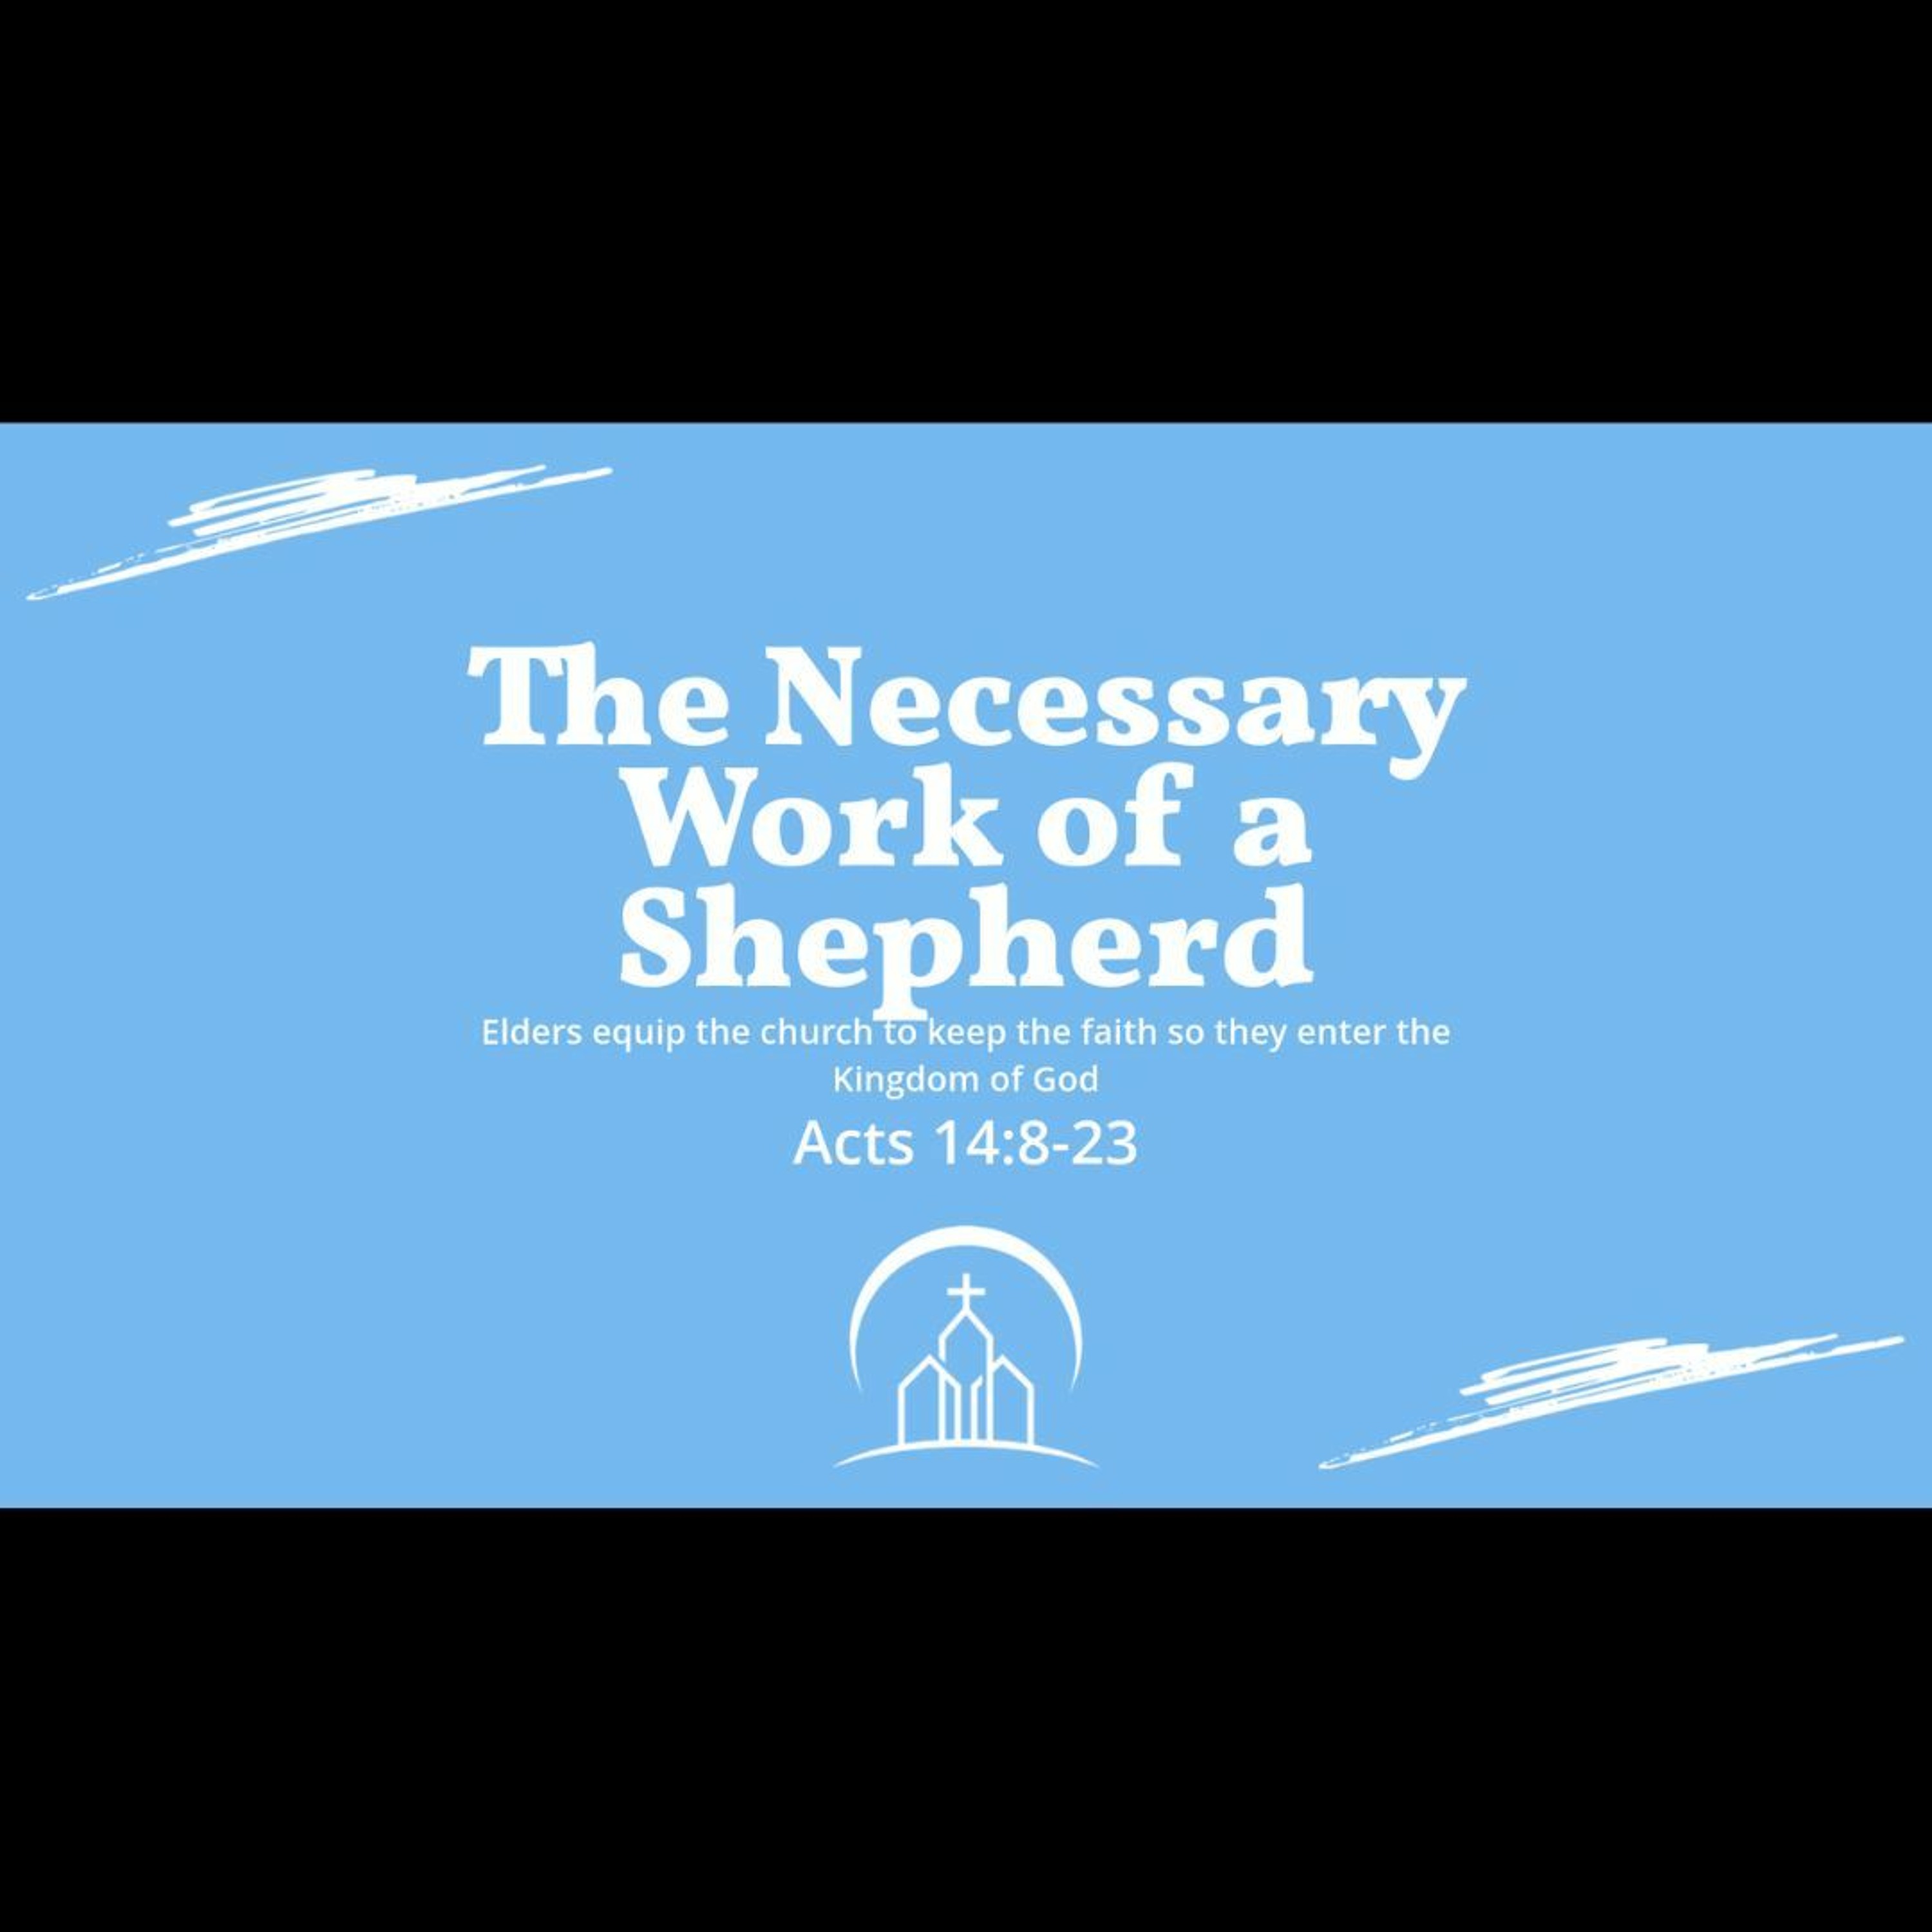 The Necessary Work of a Shepherd (Acts 14:8-23)